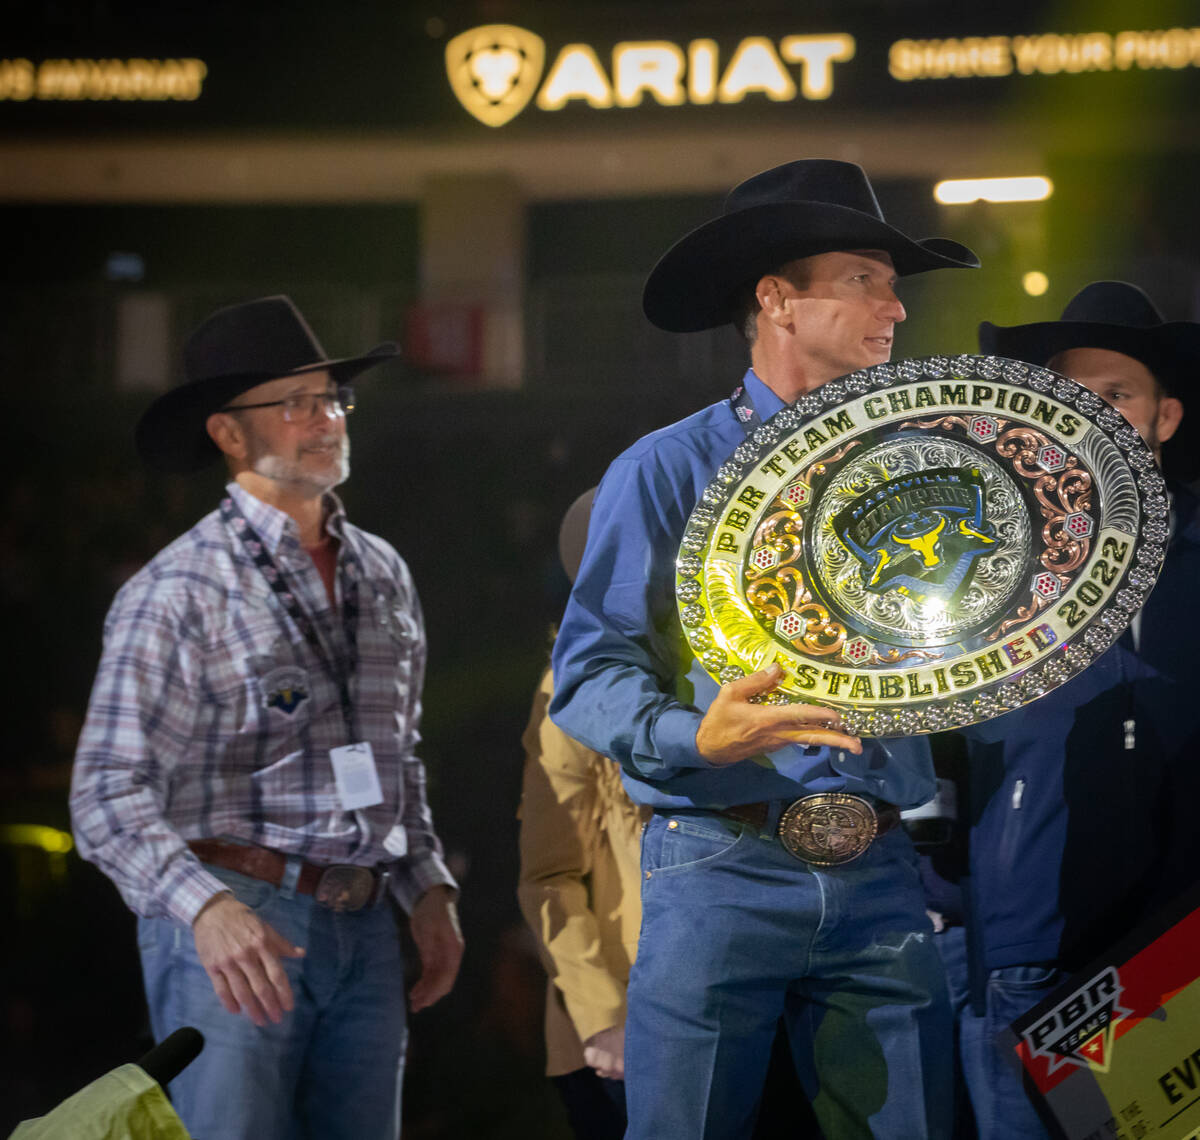 The Nashville Stampede’s Coach Justin Mcbride holds the buckle trophy at the Pro Bull Ri ...